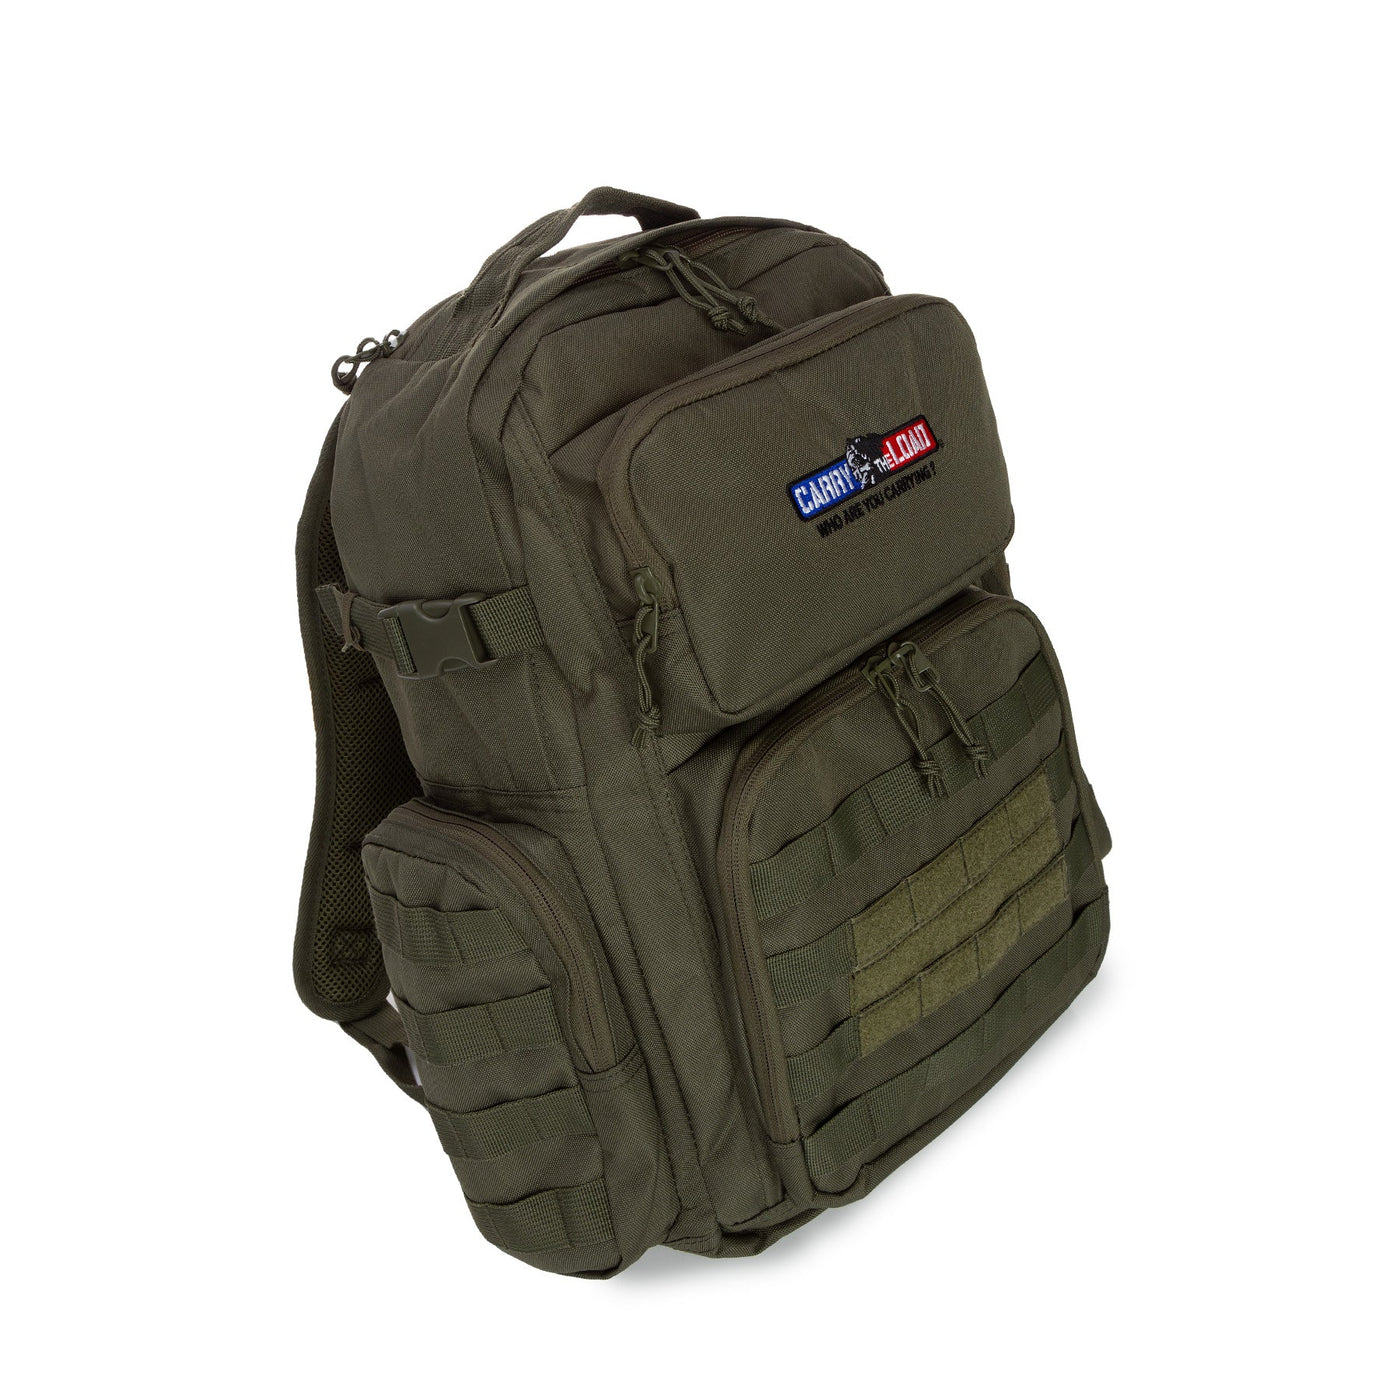 Tactical Military Green Backpack - Carry The Load Shop